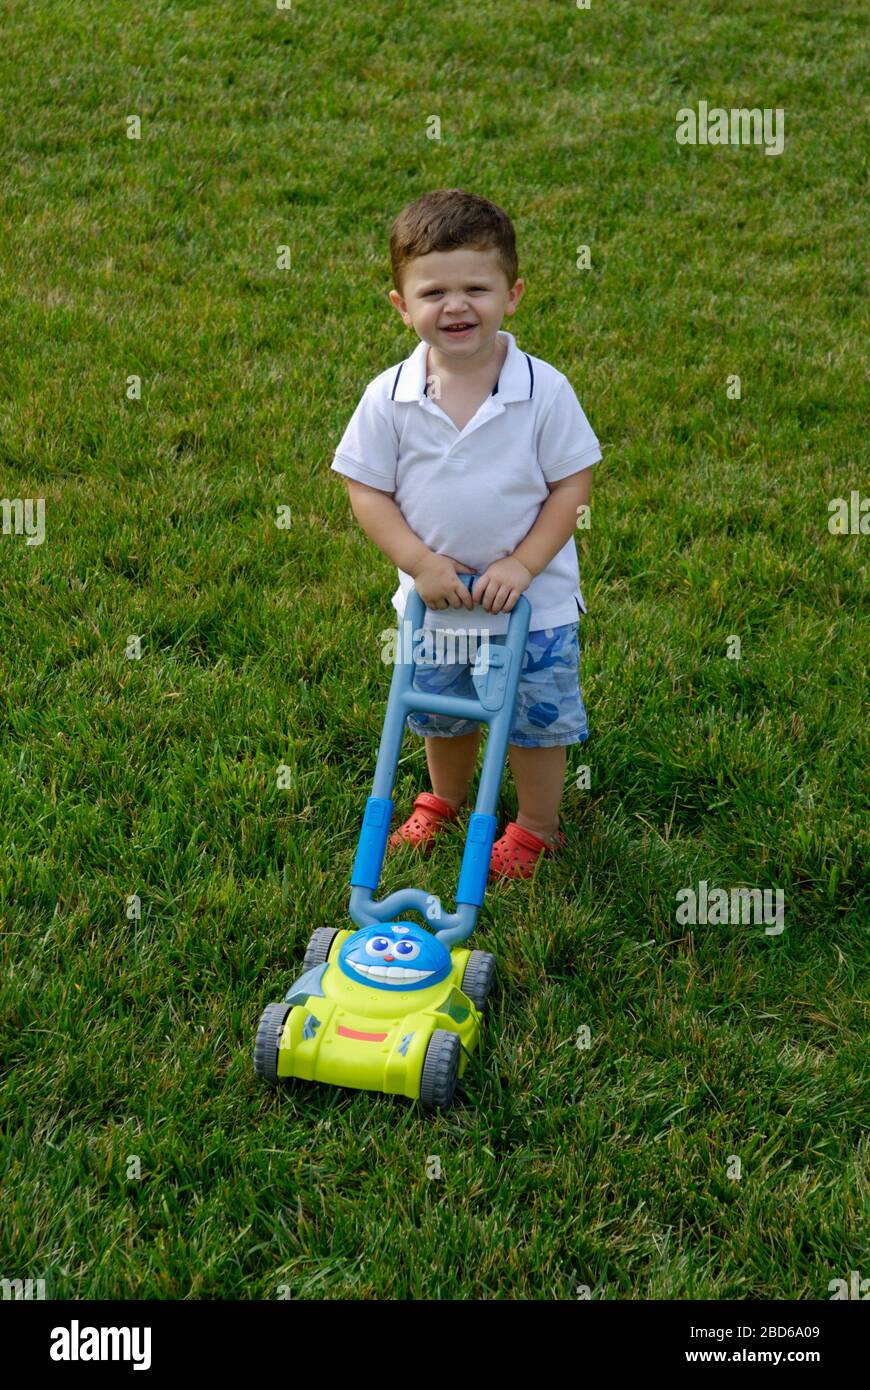 Boy with toy lawn mower Stock Photo